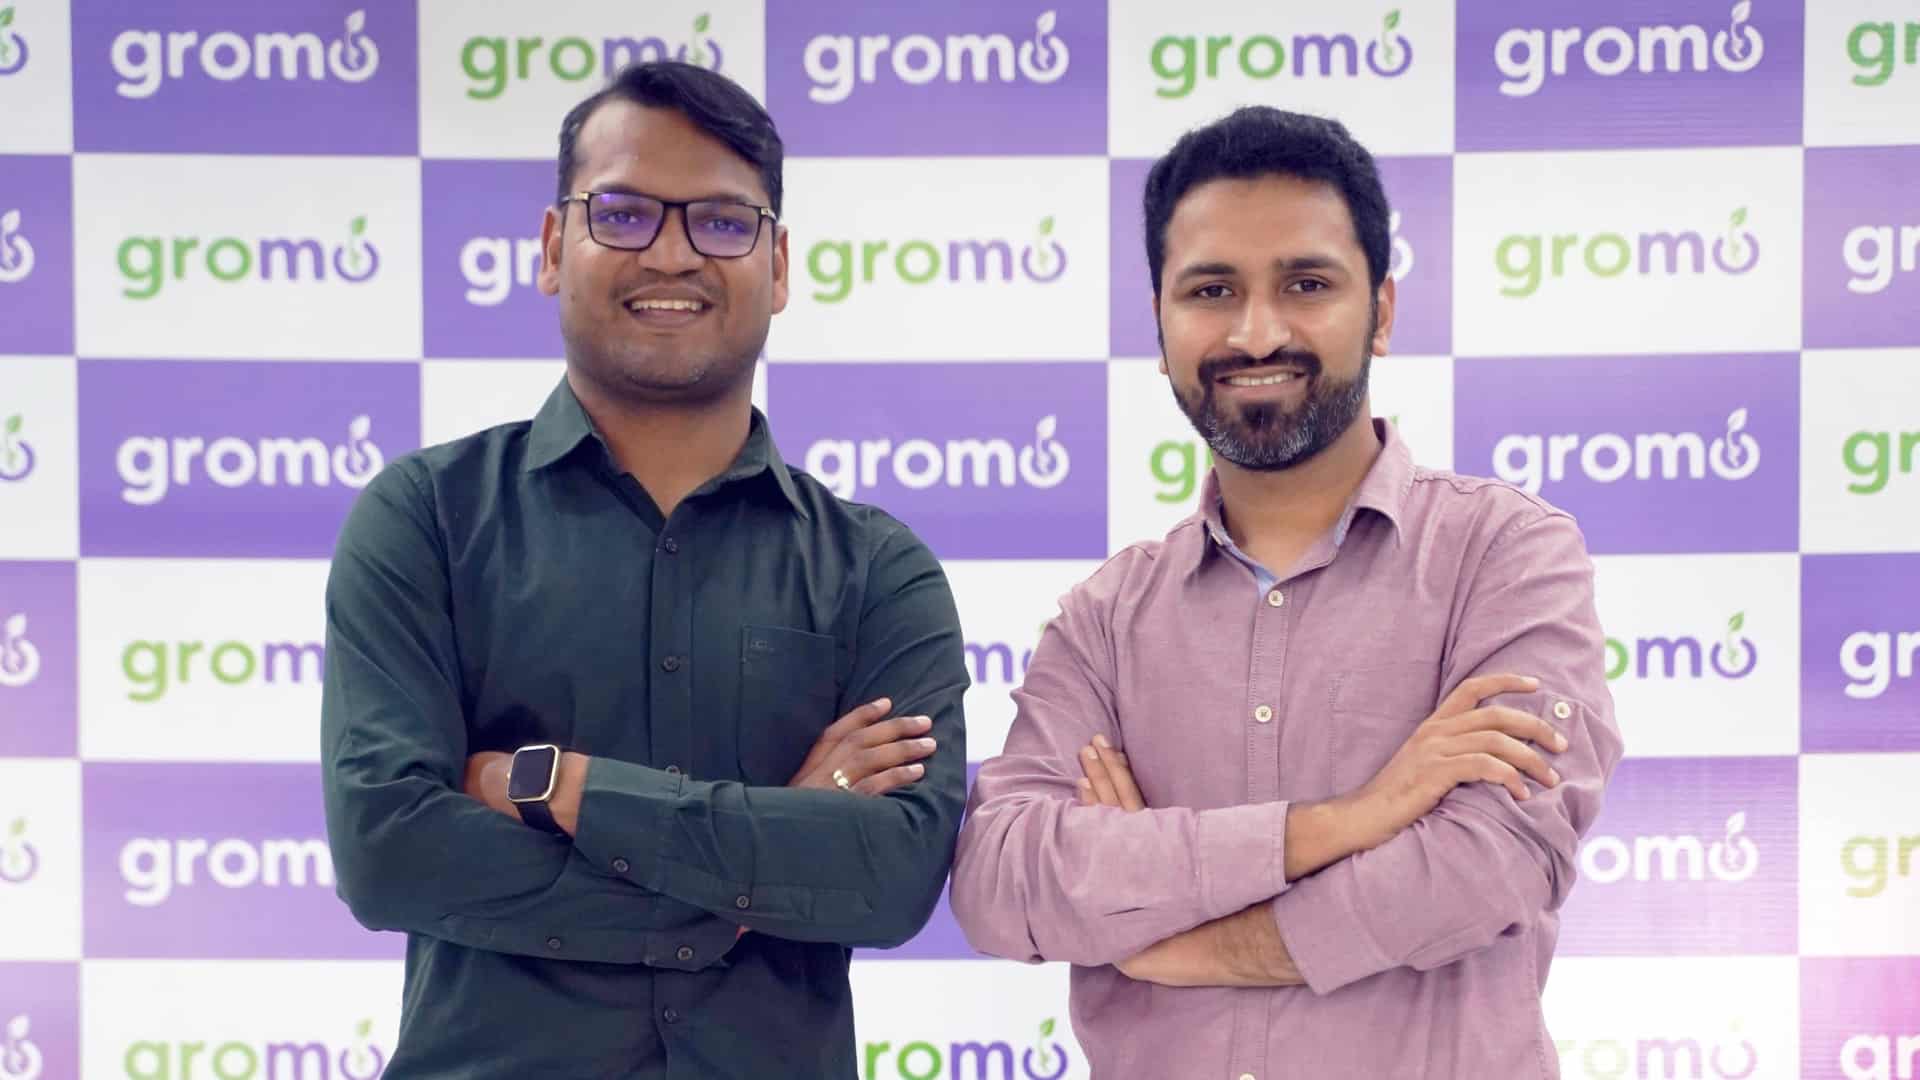 GroMo raises USD 11 million in funding led by SIG Venture Capital